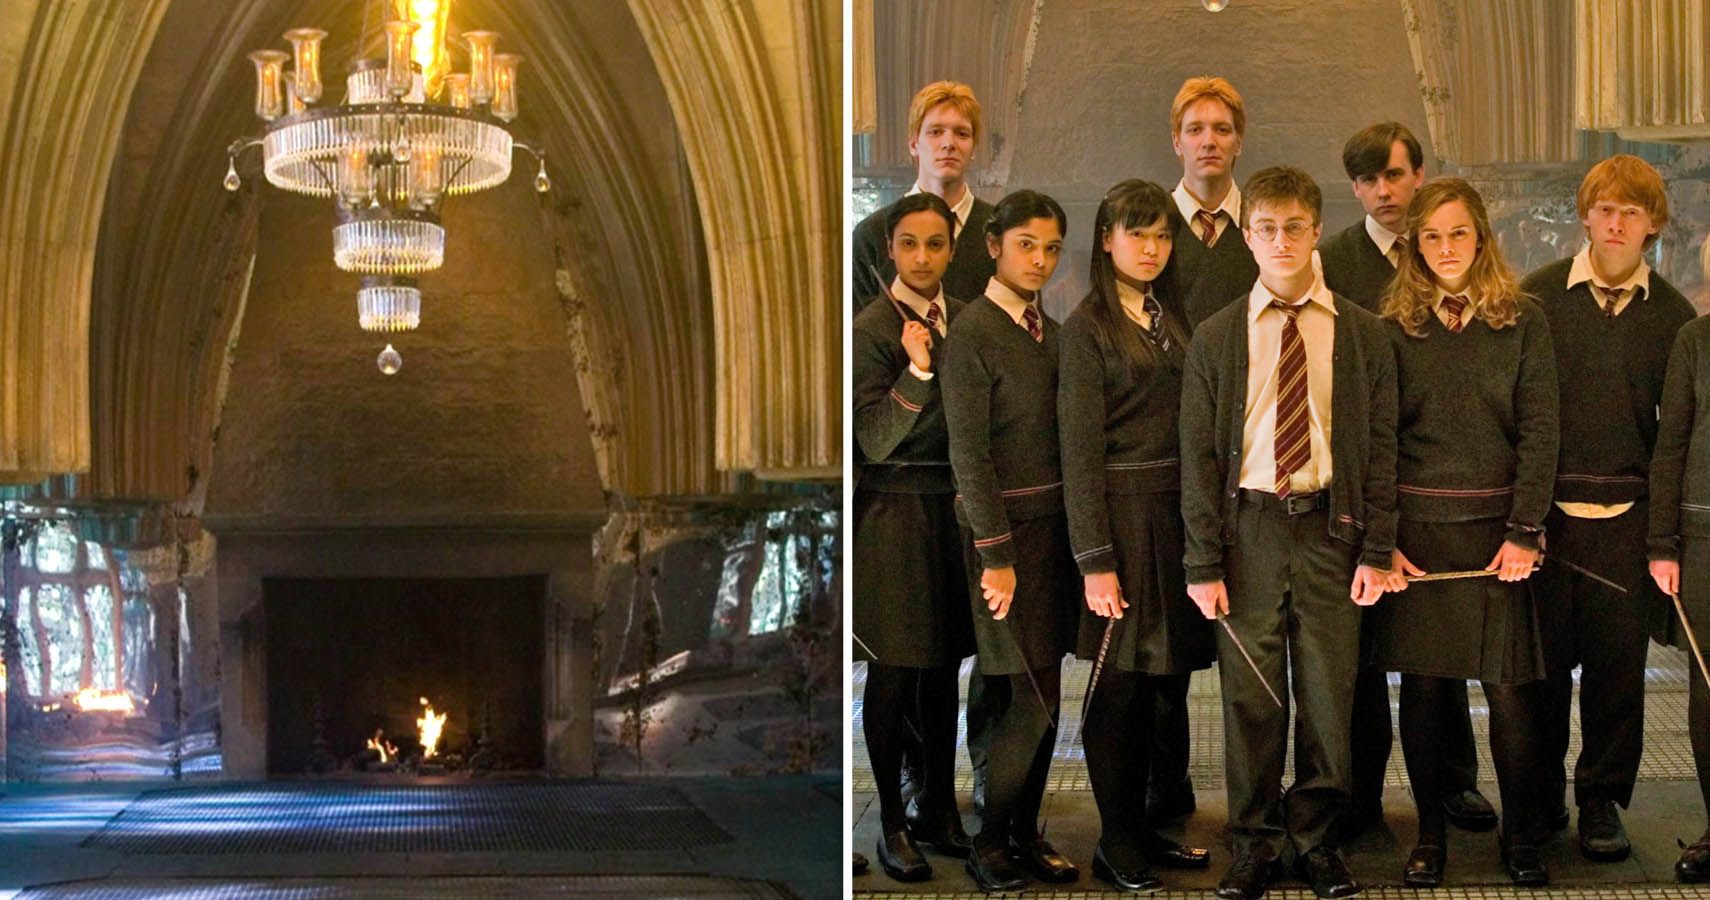 Harry Potter: 10 Room Of Requirement Scenes The Movies Didn't Show